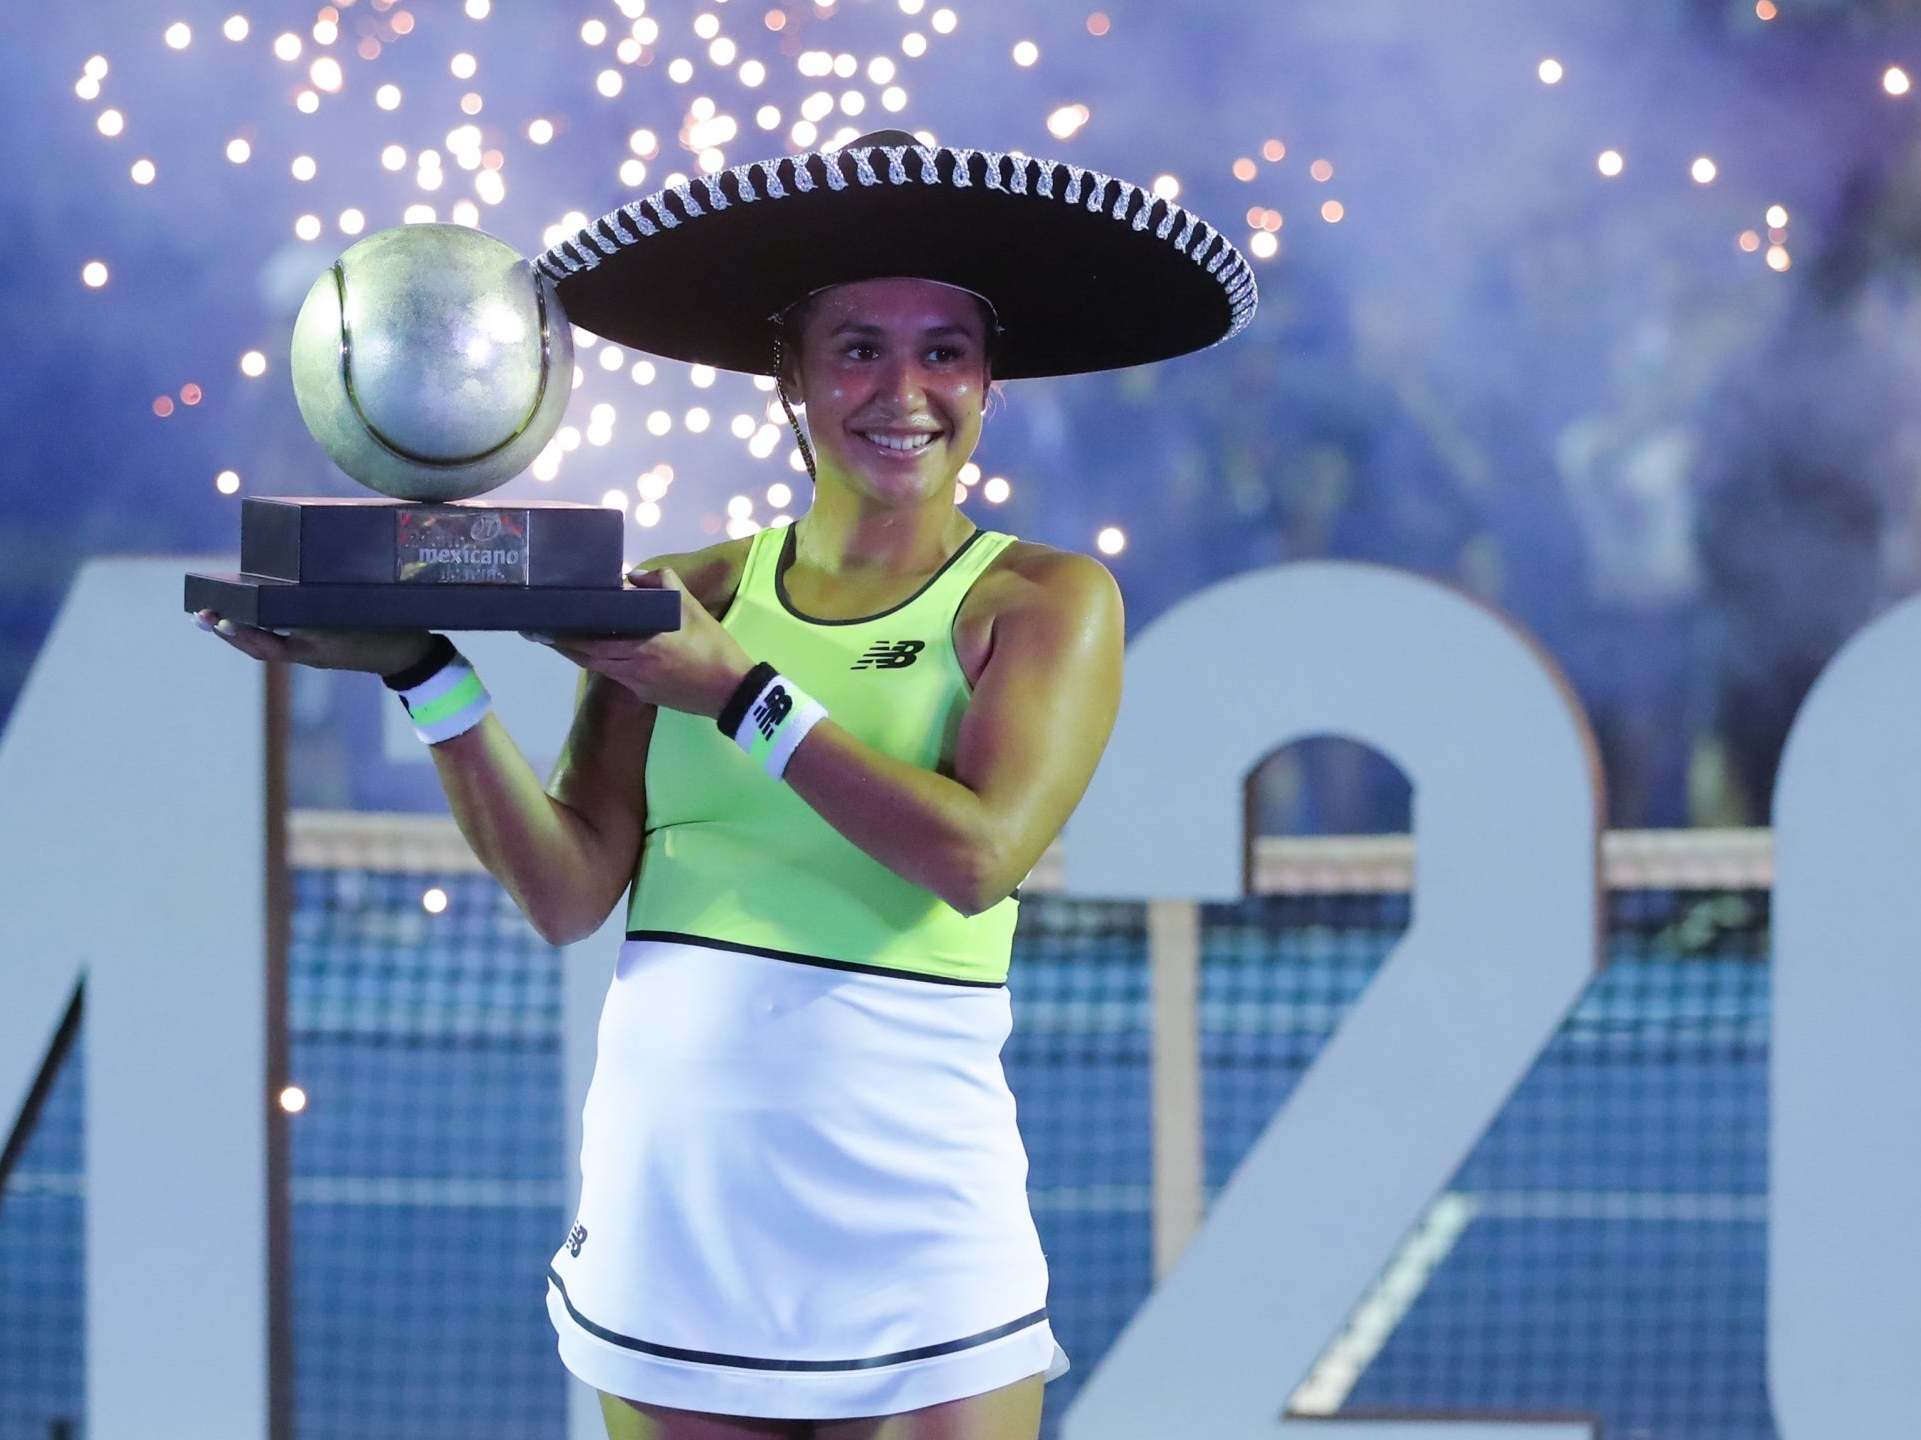 Heather Watson won her first title in four years at the Mexico Open